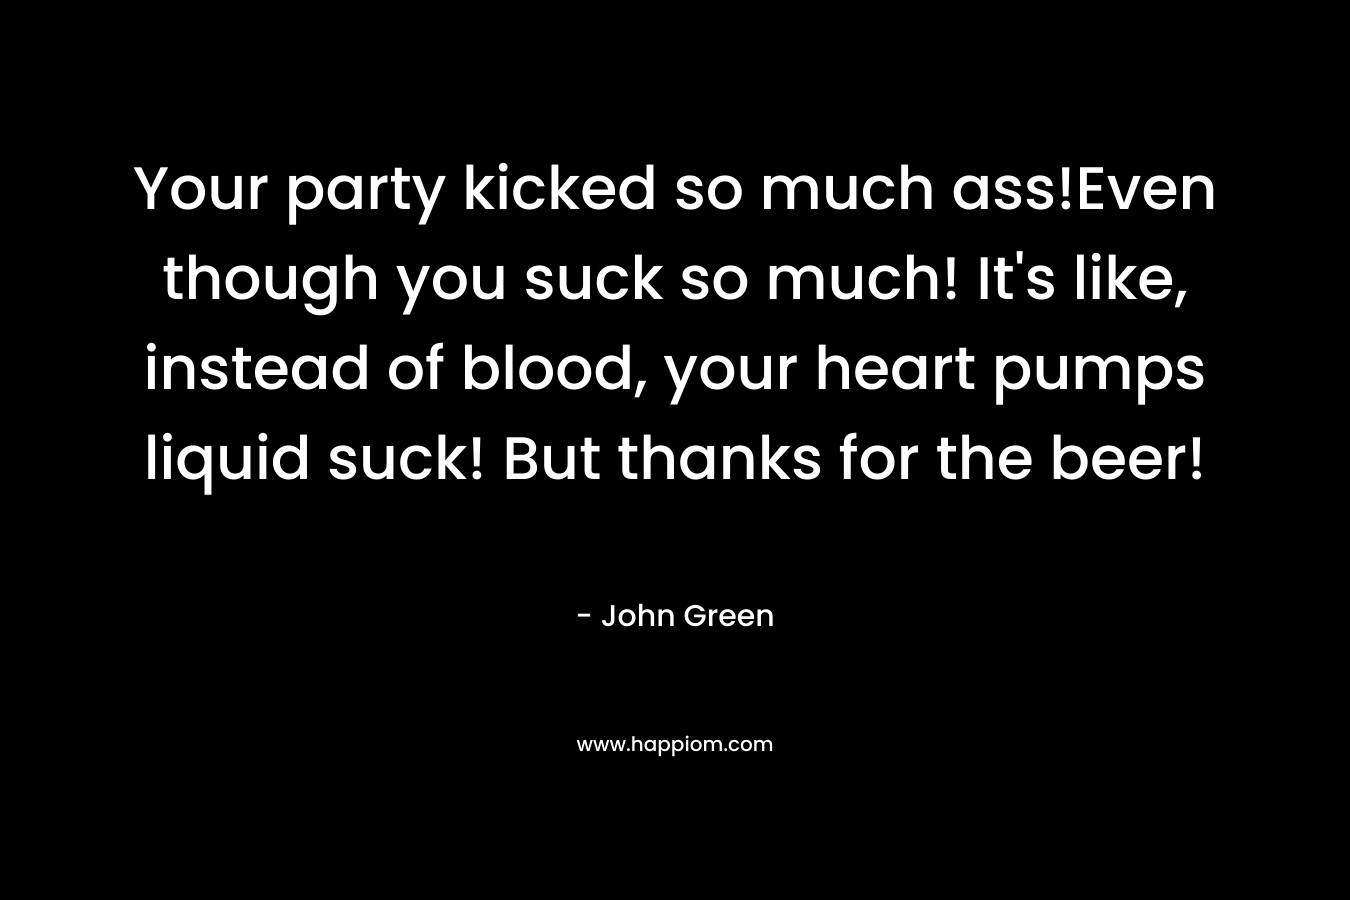 Your party kicked so much ass!Even though you suck so much! It’s like, instead of blood, your heart pumps liquid suck! But thanks for the beer! – John Green